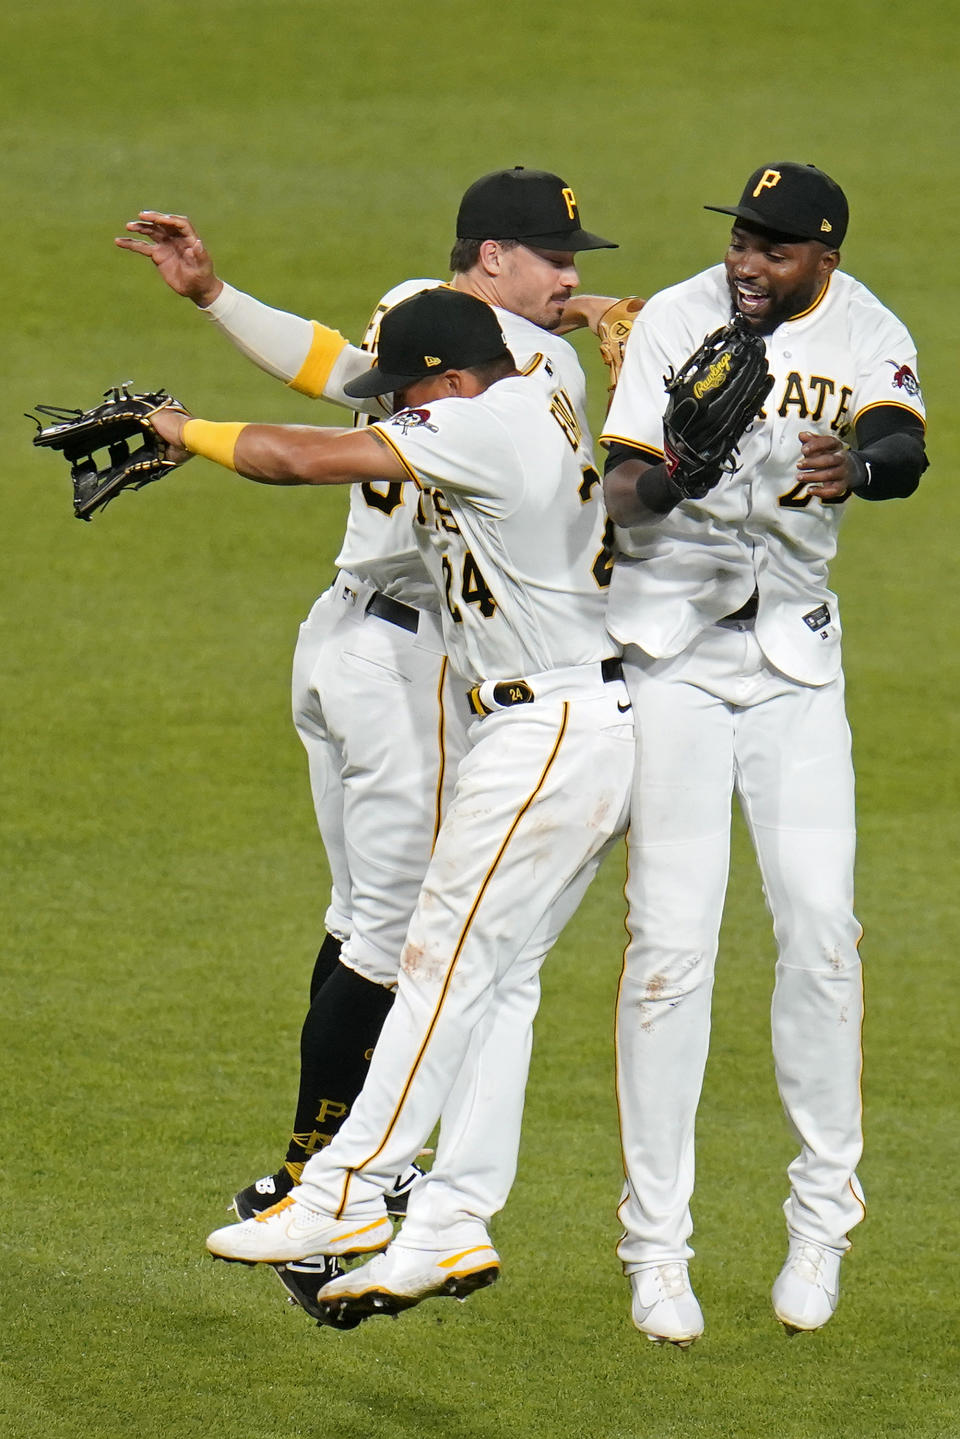 Pittsburgh Pirates outfielders Phillip Evans (24), Bryan Reynolds, center rear, and Gregory Polanco, right, celebrate after getting the final out of a baseball game against the Chicago White Sox in Pittsburgh, Tuesday, June 22, 2021. The Pirates won 6-3. (AP Photo/Gene J. Puskar)